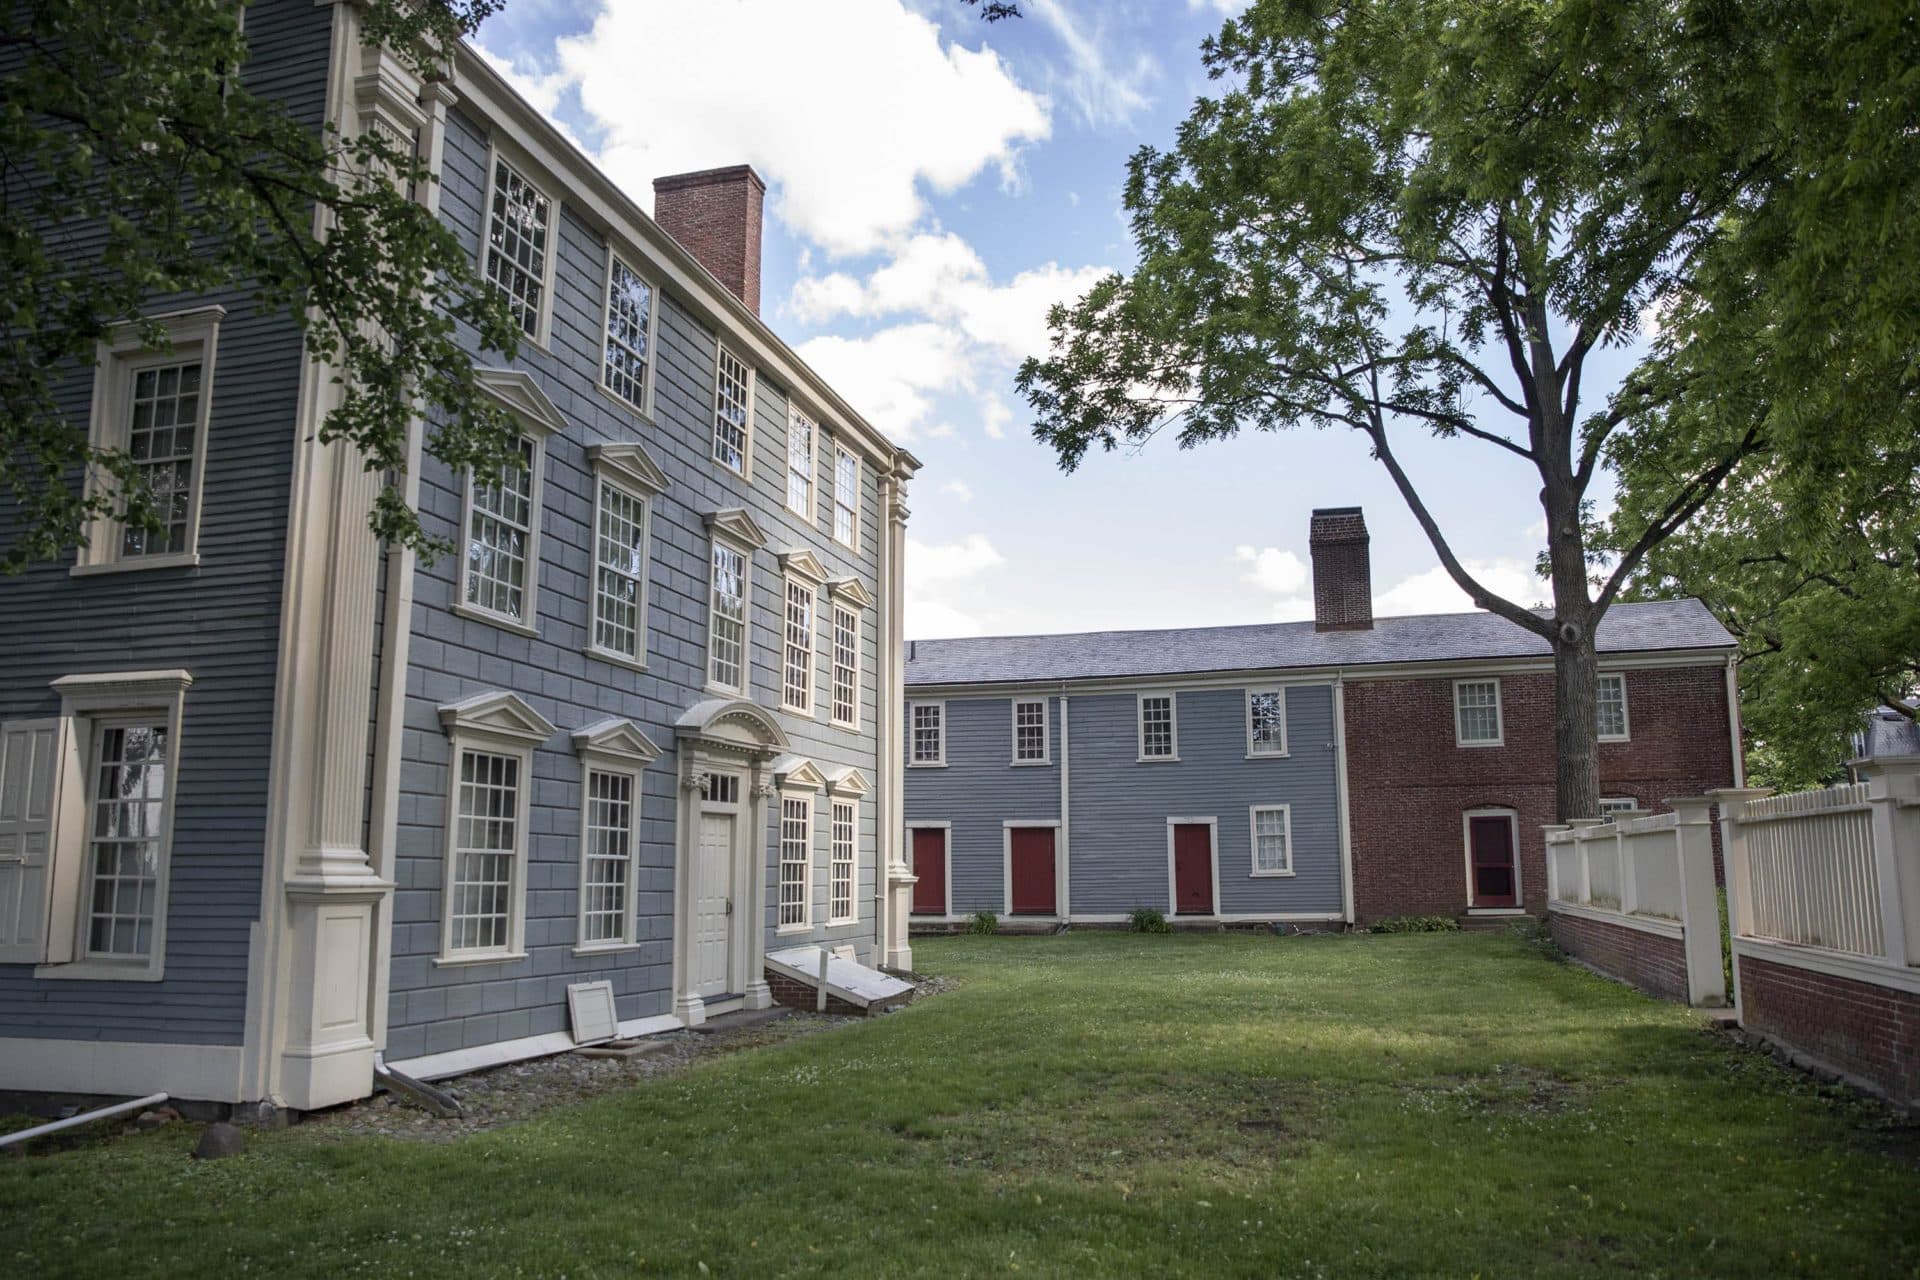 The Royall House and Slave Quarters in Medford. (Robin Lubbock/WBUR)